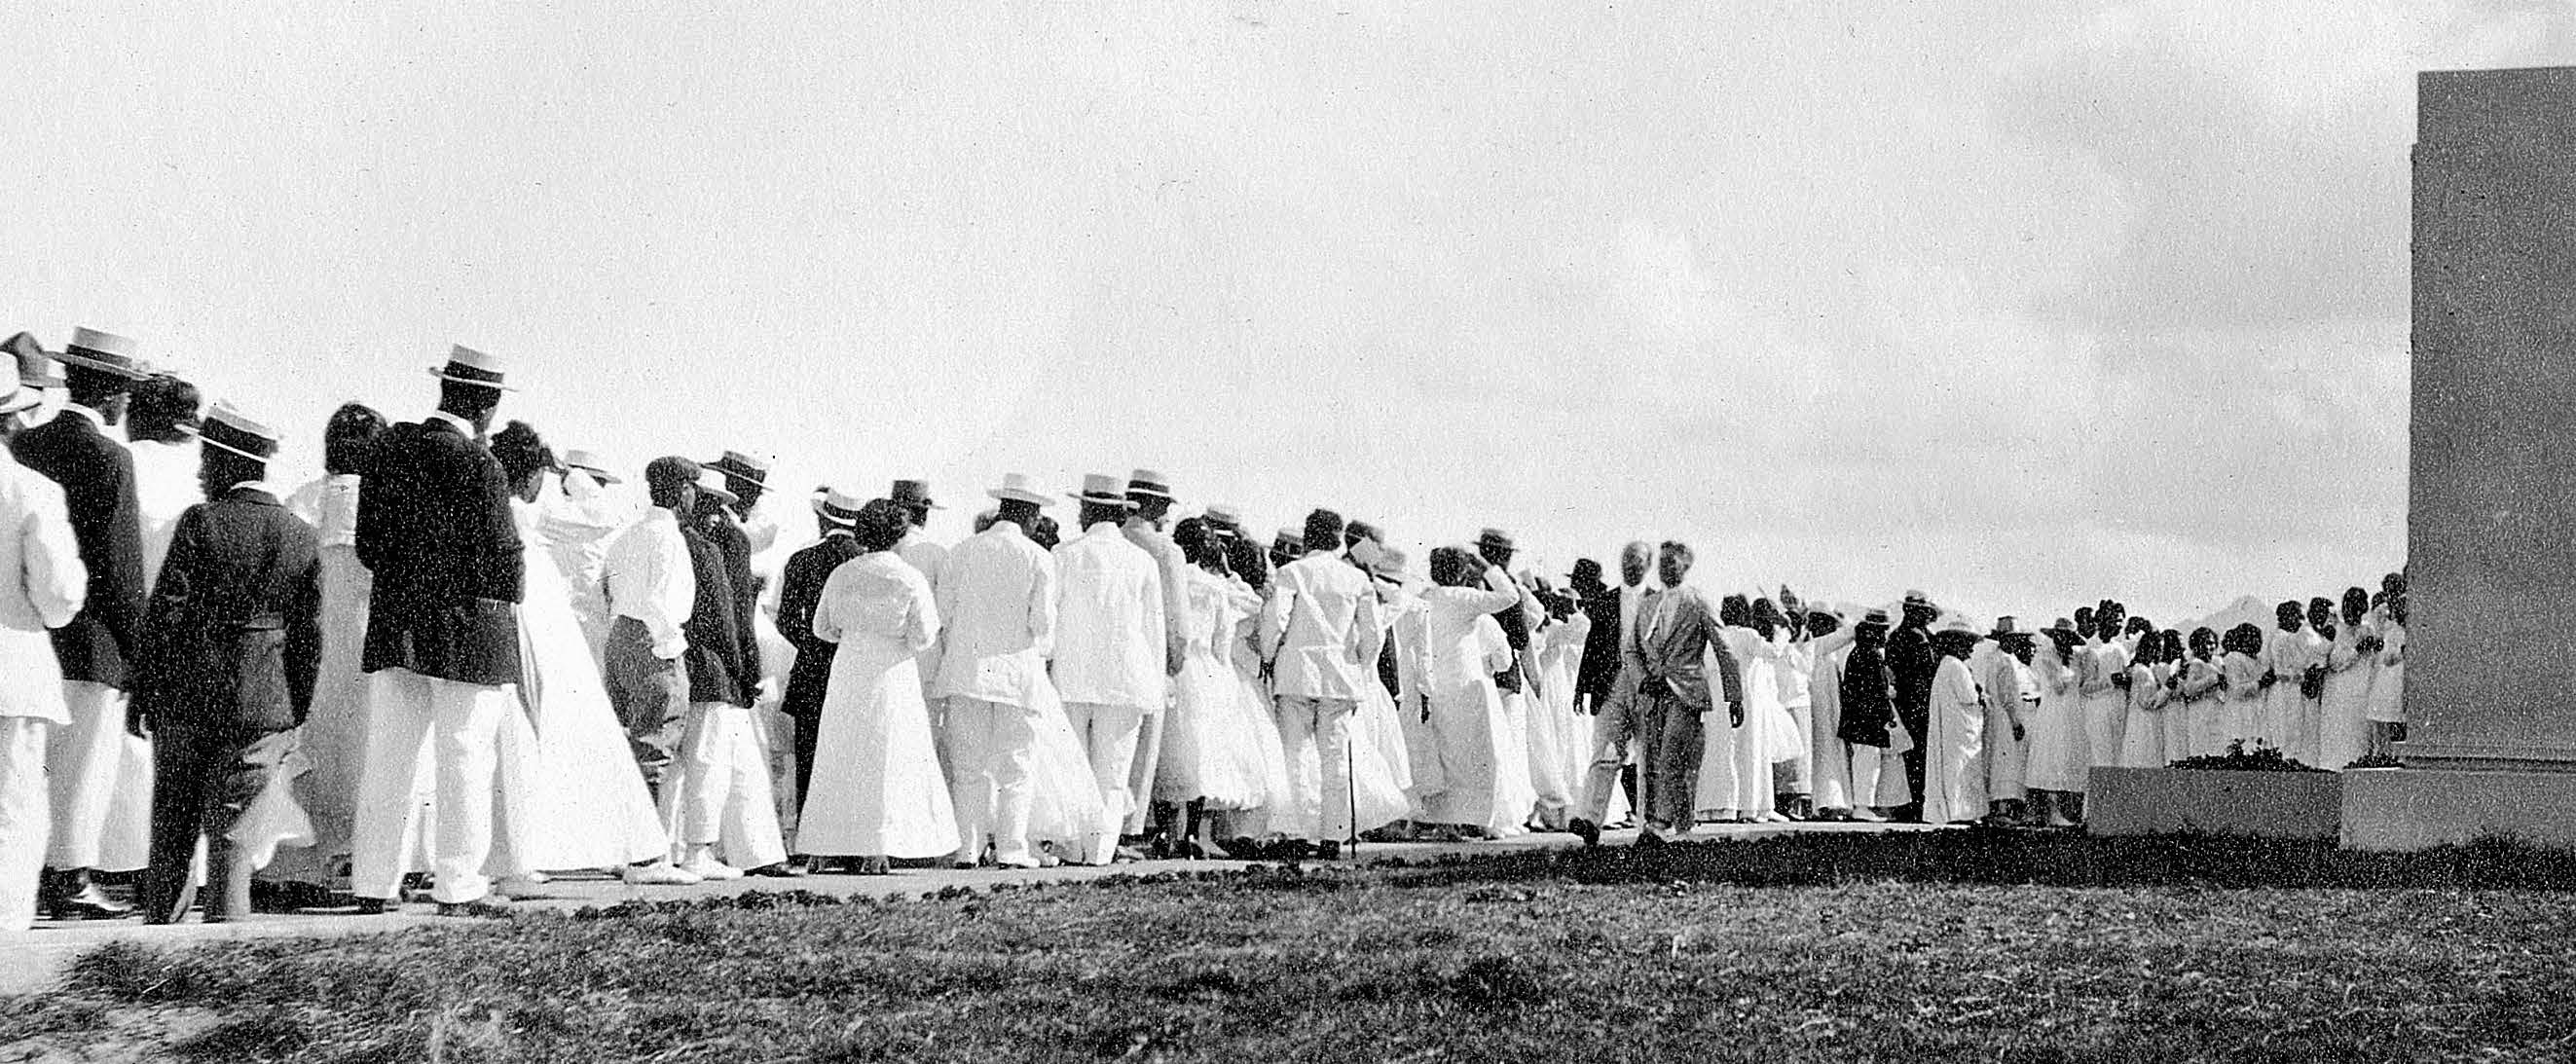 On 27 November 1919 (Thanksgiving Day), a group of 310 people dressed in white were admitted into the temple for the first dedicatory session. Four more dedicatory sessions would be held in the days that followed. Photos courtesy of BYU–Hawaii Archives.